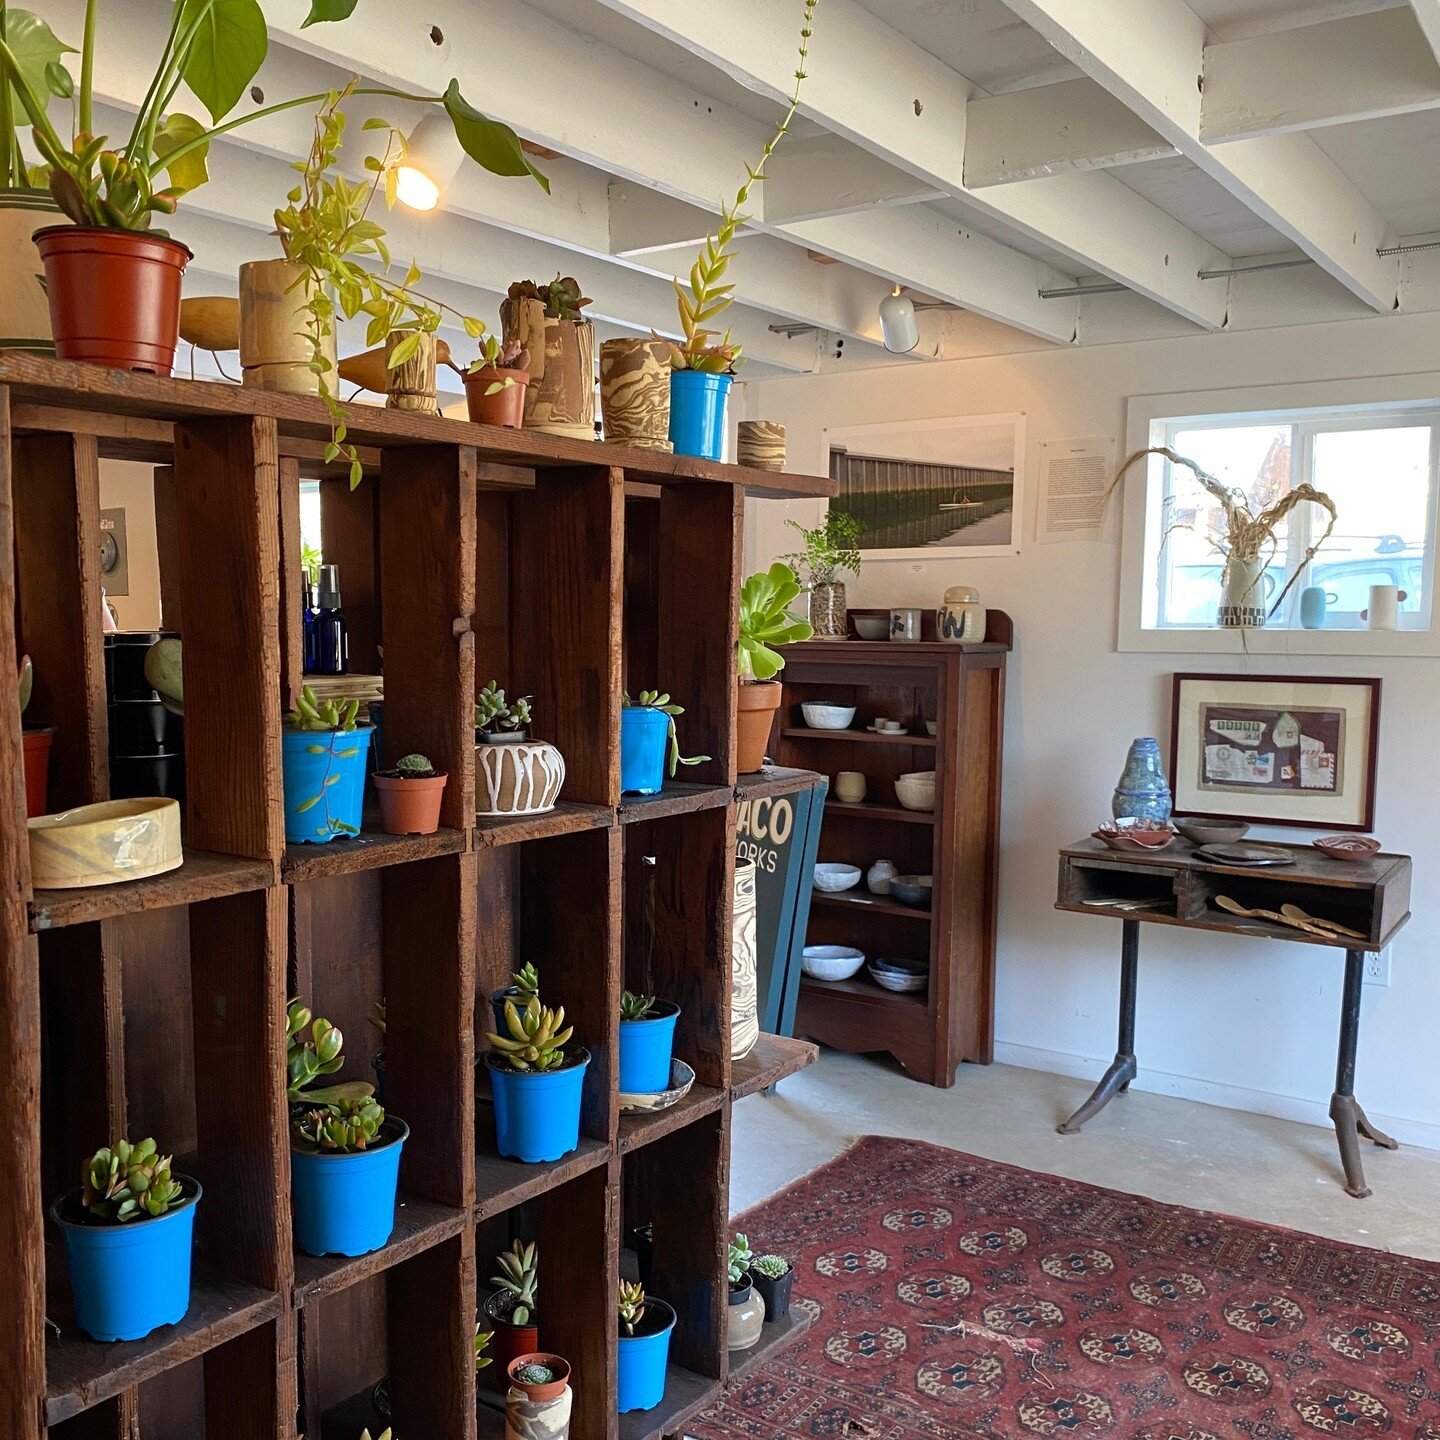 We are hosting an OPEN HOUSE January 1st from 3-7p. 

Open to all! Come see what we're up to, tour our ceramics studio, browse our art gallery or bring a friend and get into some pottery! There will be snacks &amp; great vibes. Set the mood for 2024 